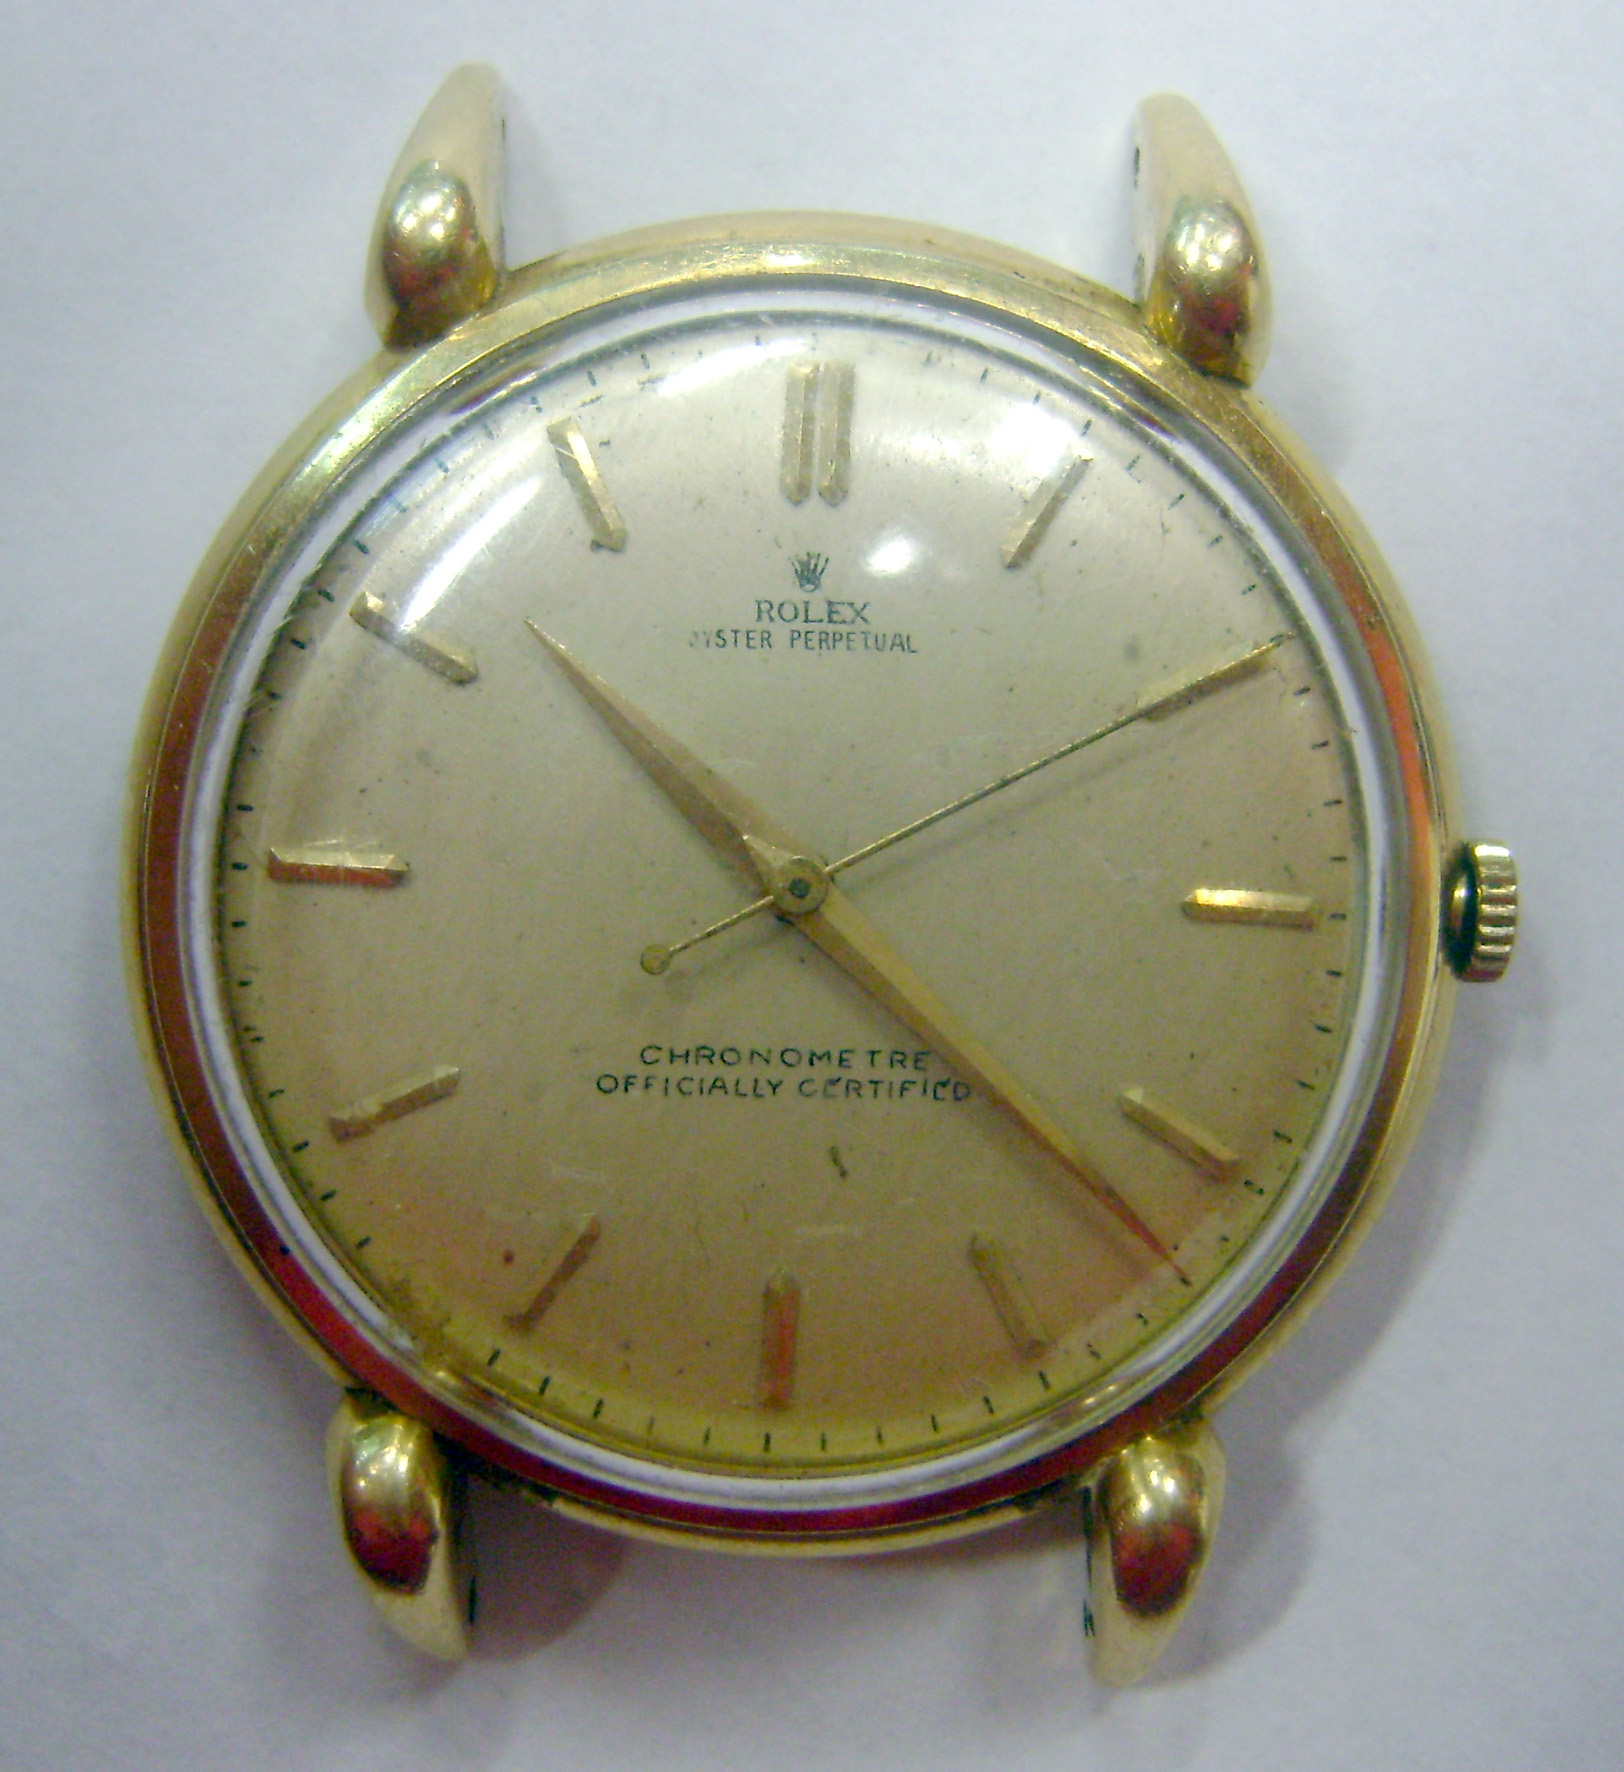 Very rare Rolex vintage 1940's - The Rolex Area - RWG